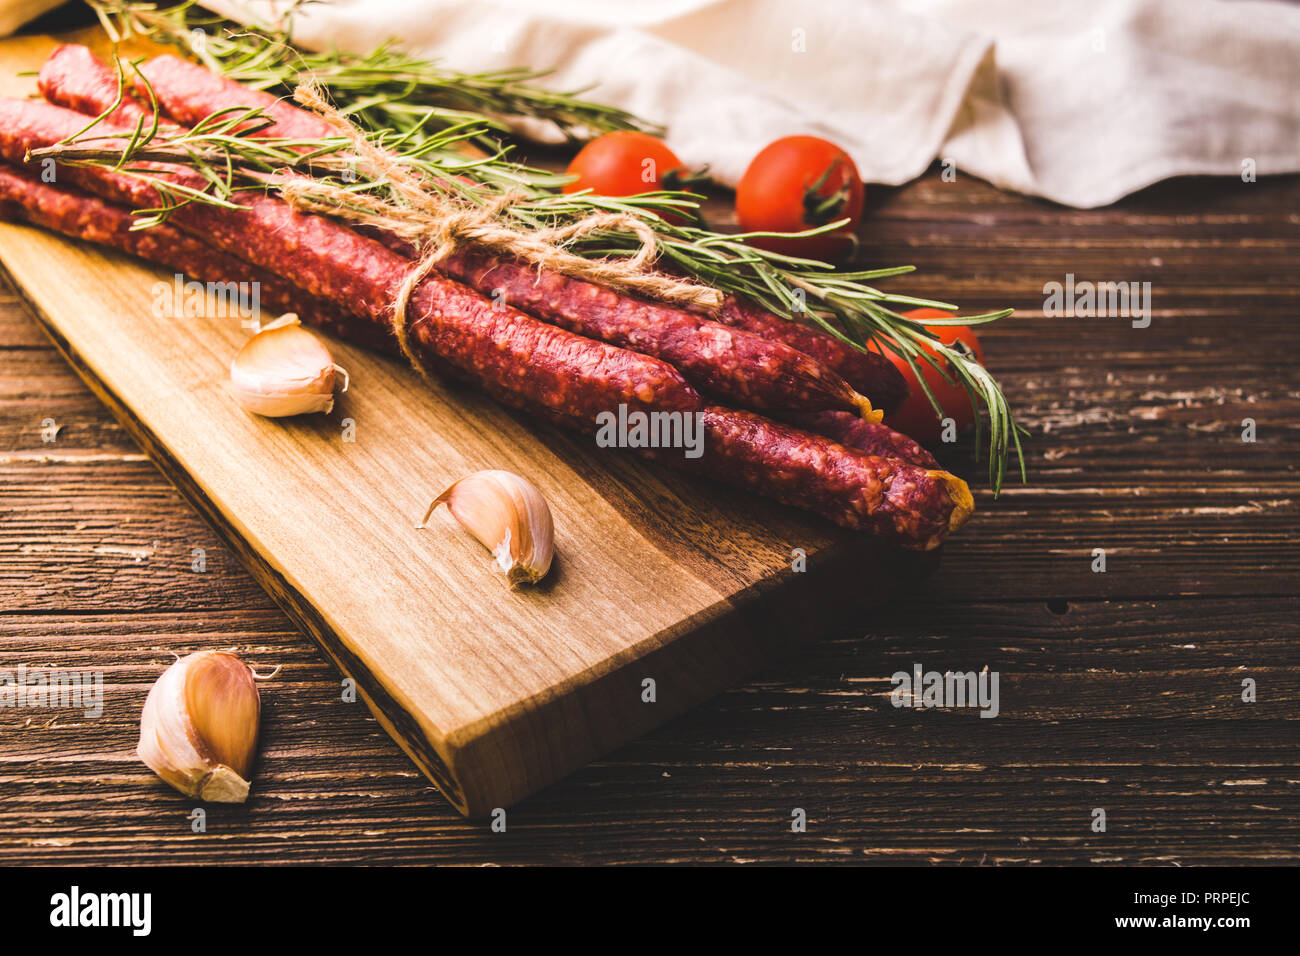 Kabanosy - smoked traditional polish pork sausages on wooden cutting board. With rosemary herb, garlic cloves and tomatoes. On rustic wooden table Stock Photo